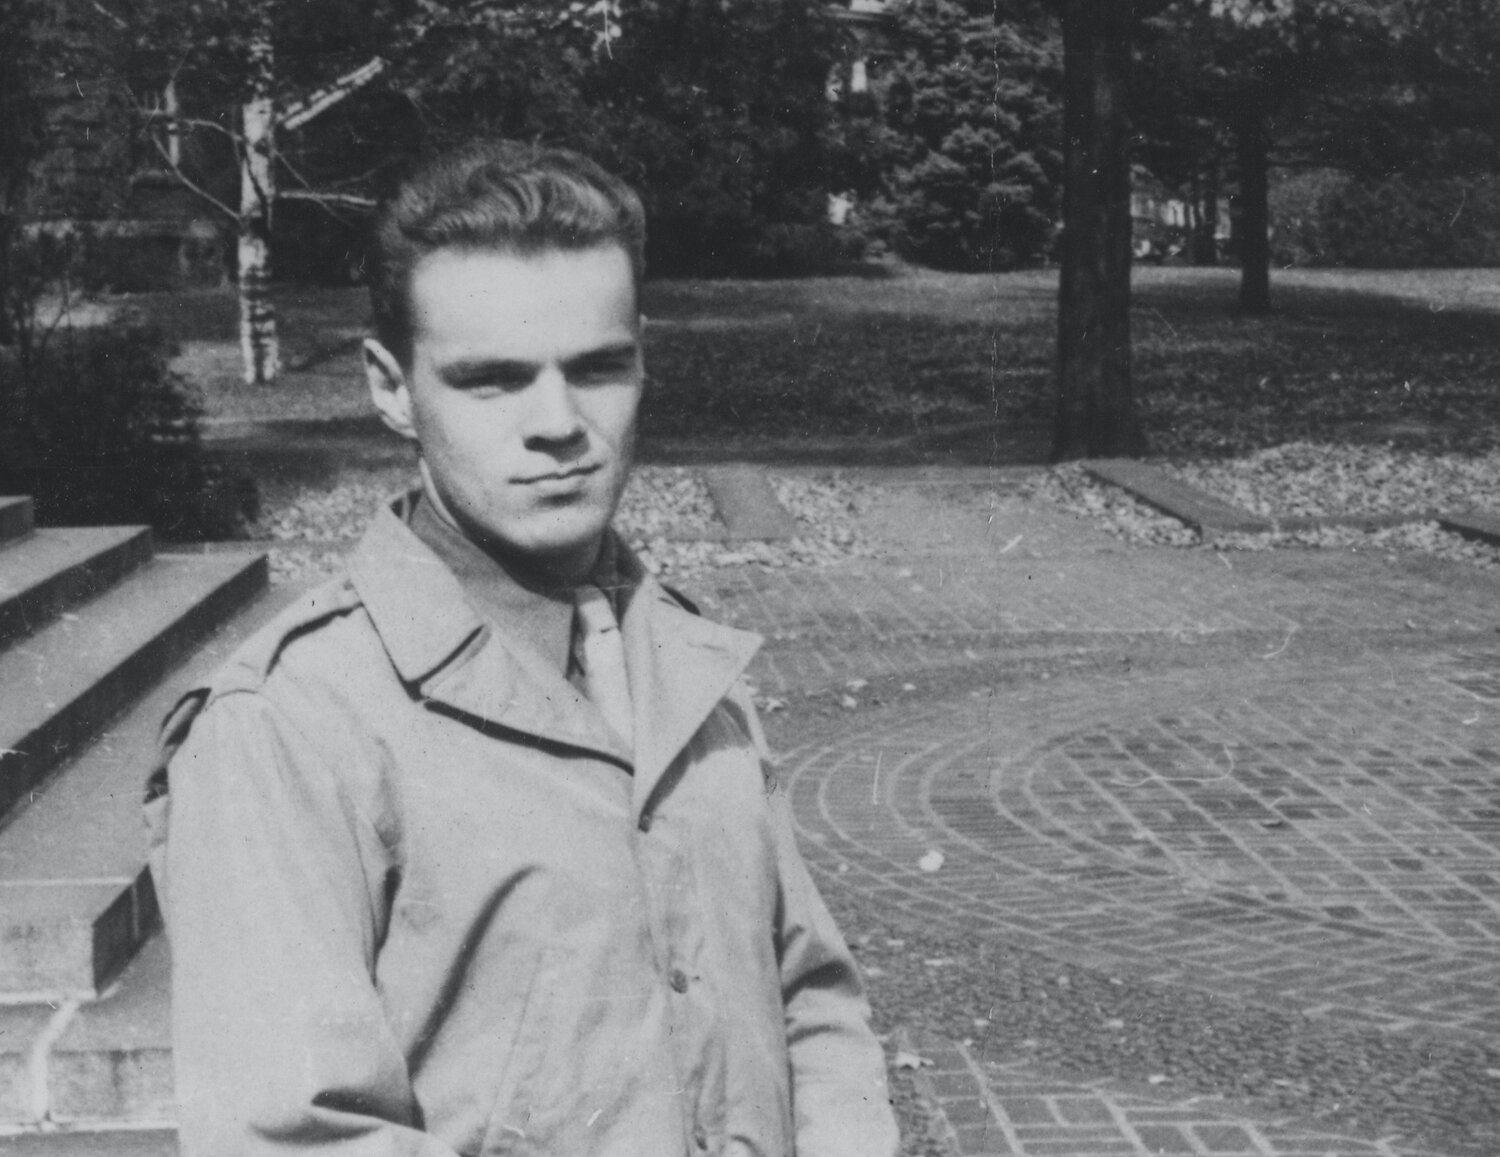 Bob Mackreth in military training at Lafayette College, at around age 20. He turned 100 this month.